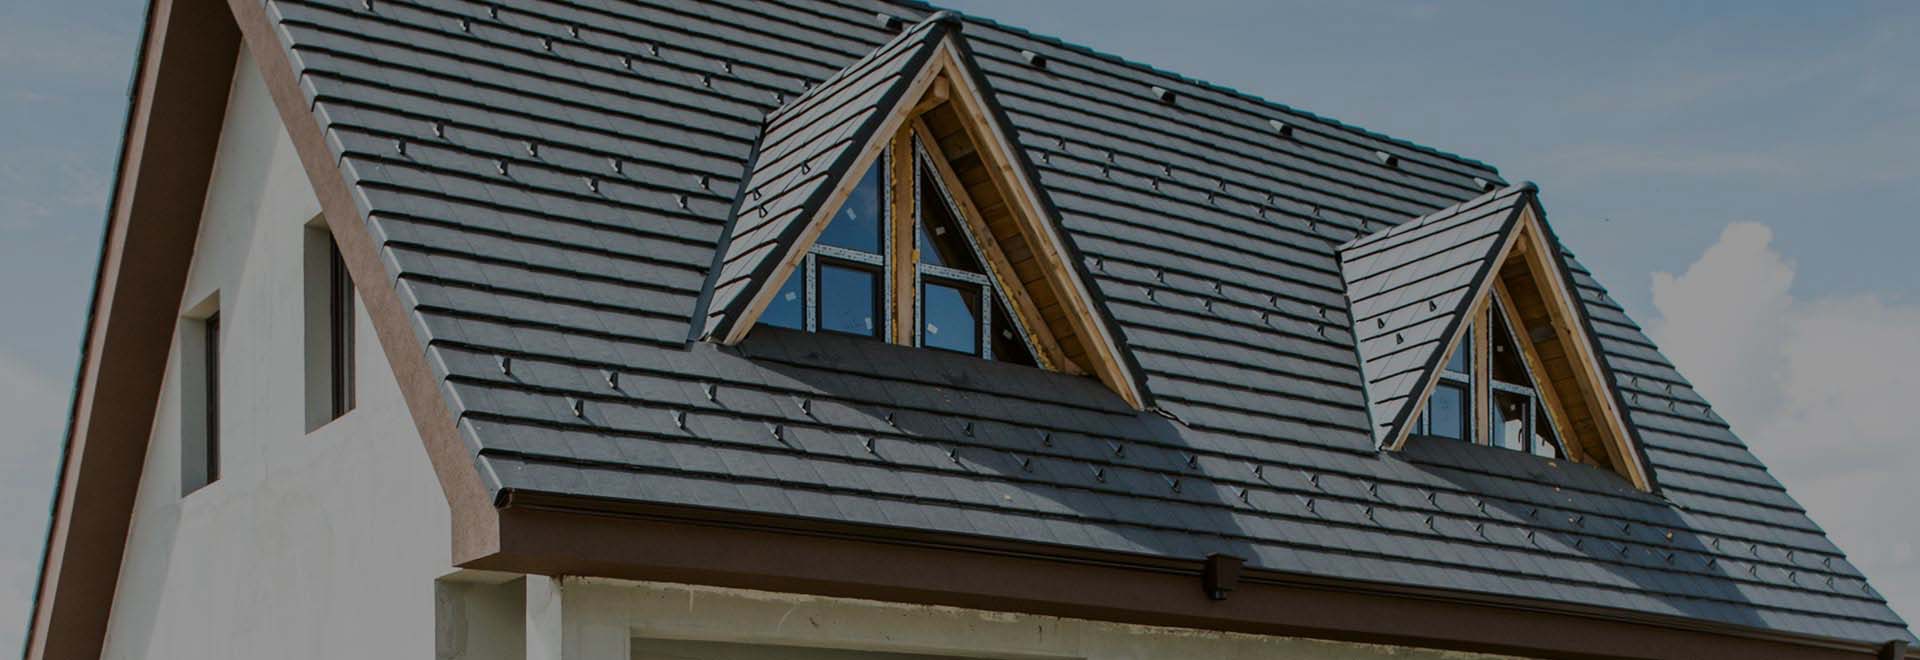 Residential Roofing Contractors in Frisco, TX